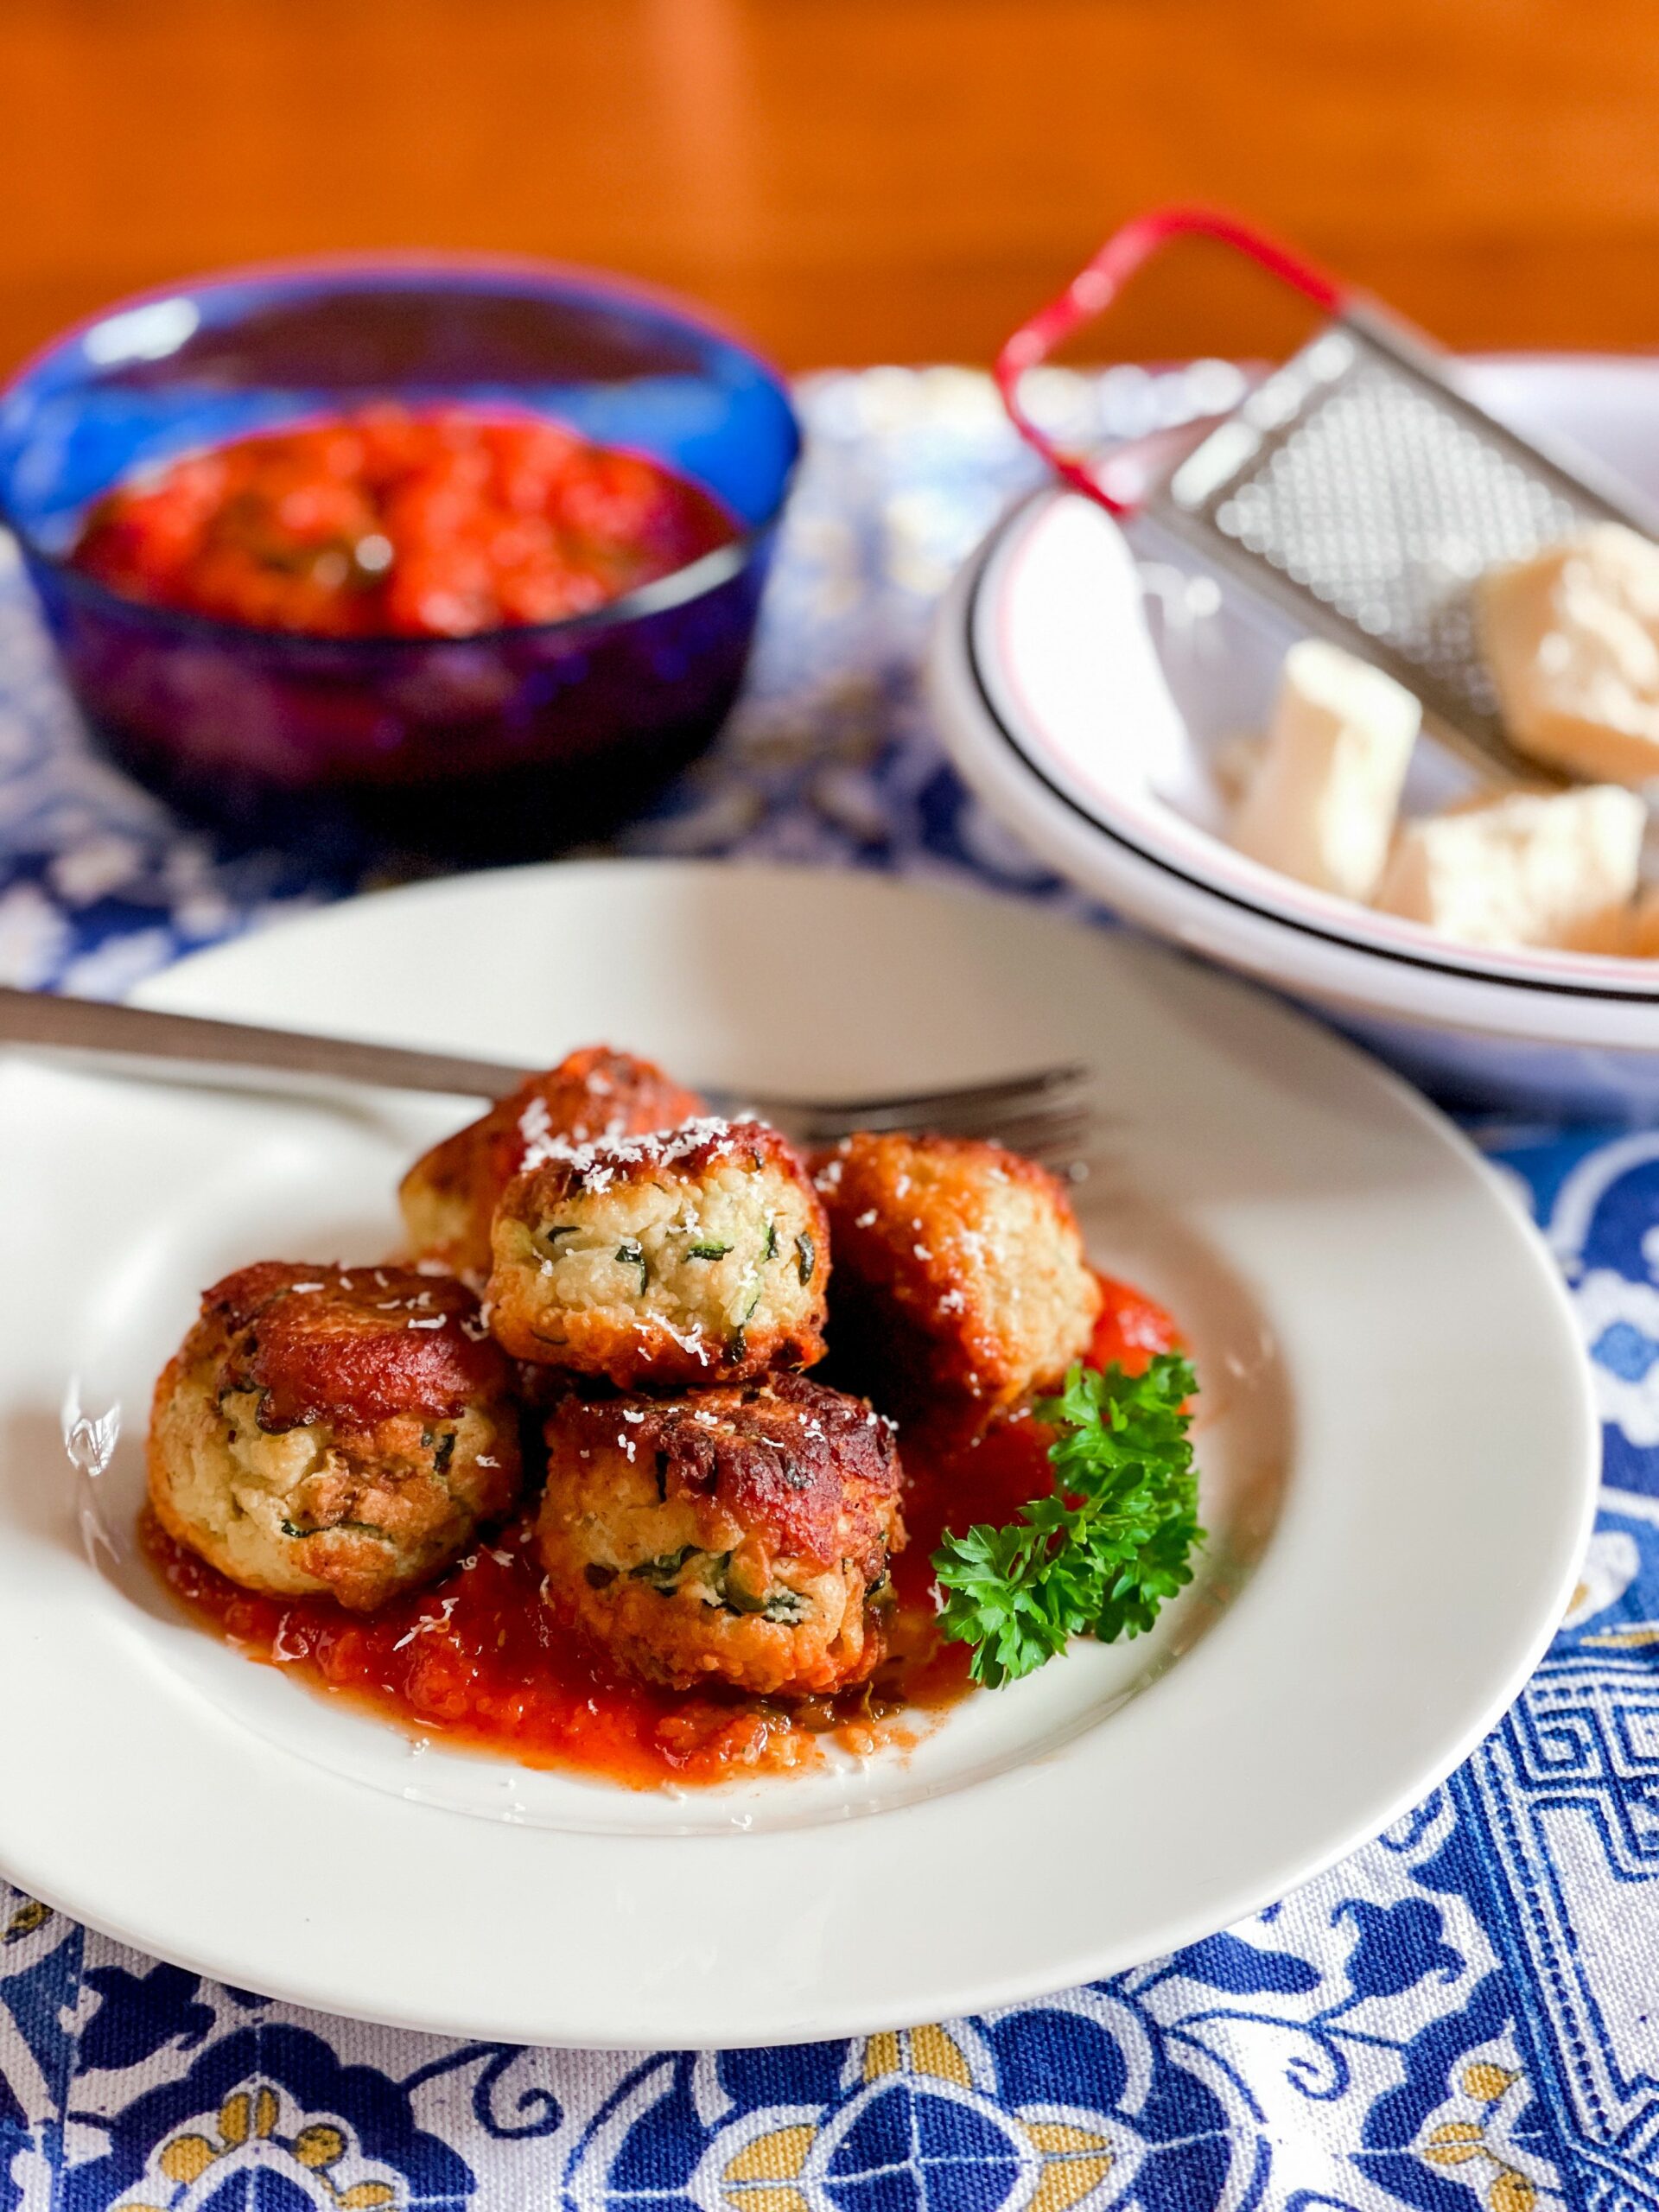 zucchini meatballs on plate with tomato sauce and cheese on table.